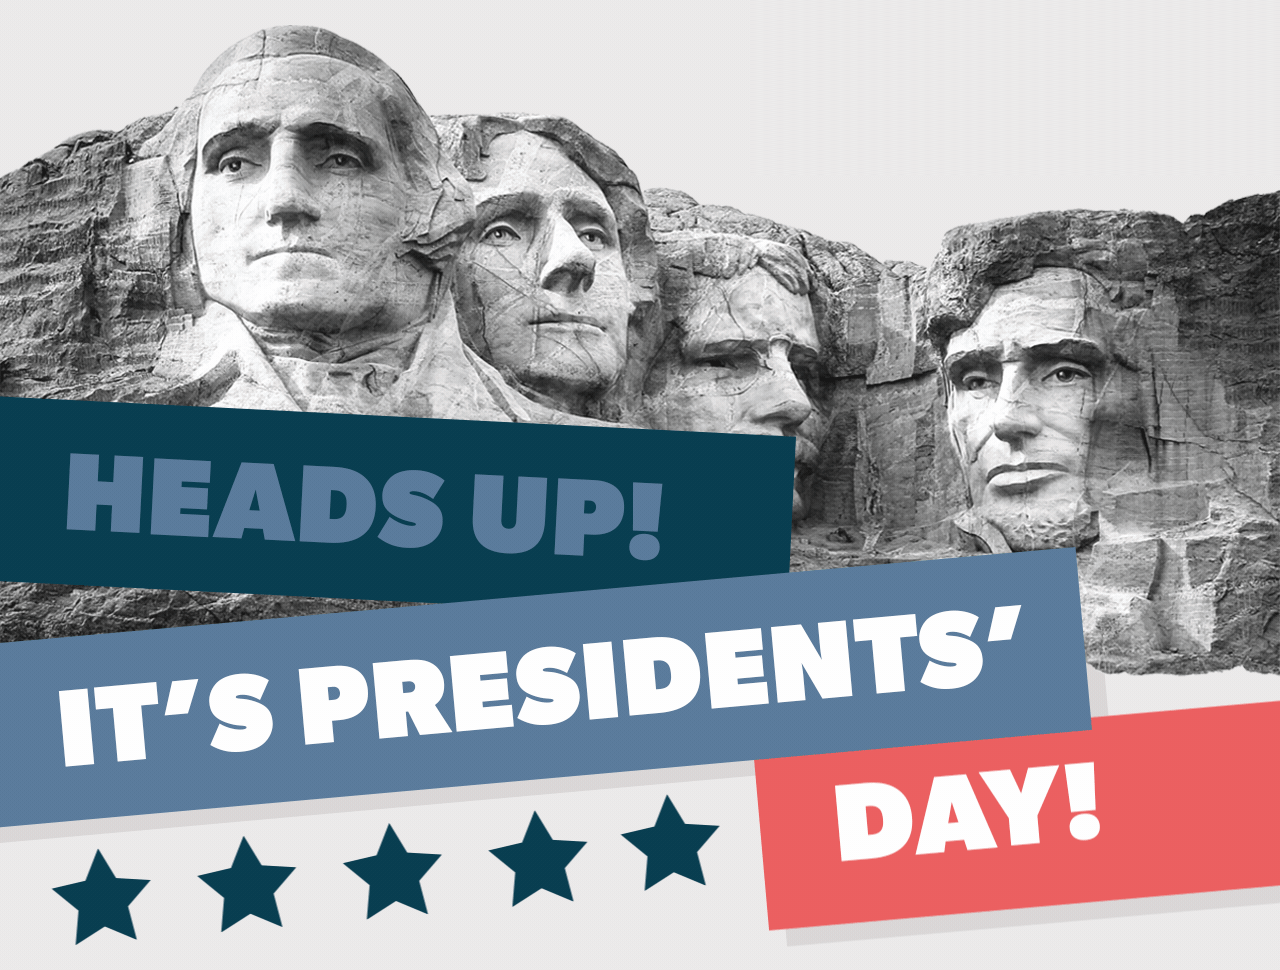 Heads up! It's Presidents' Day!